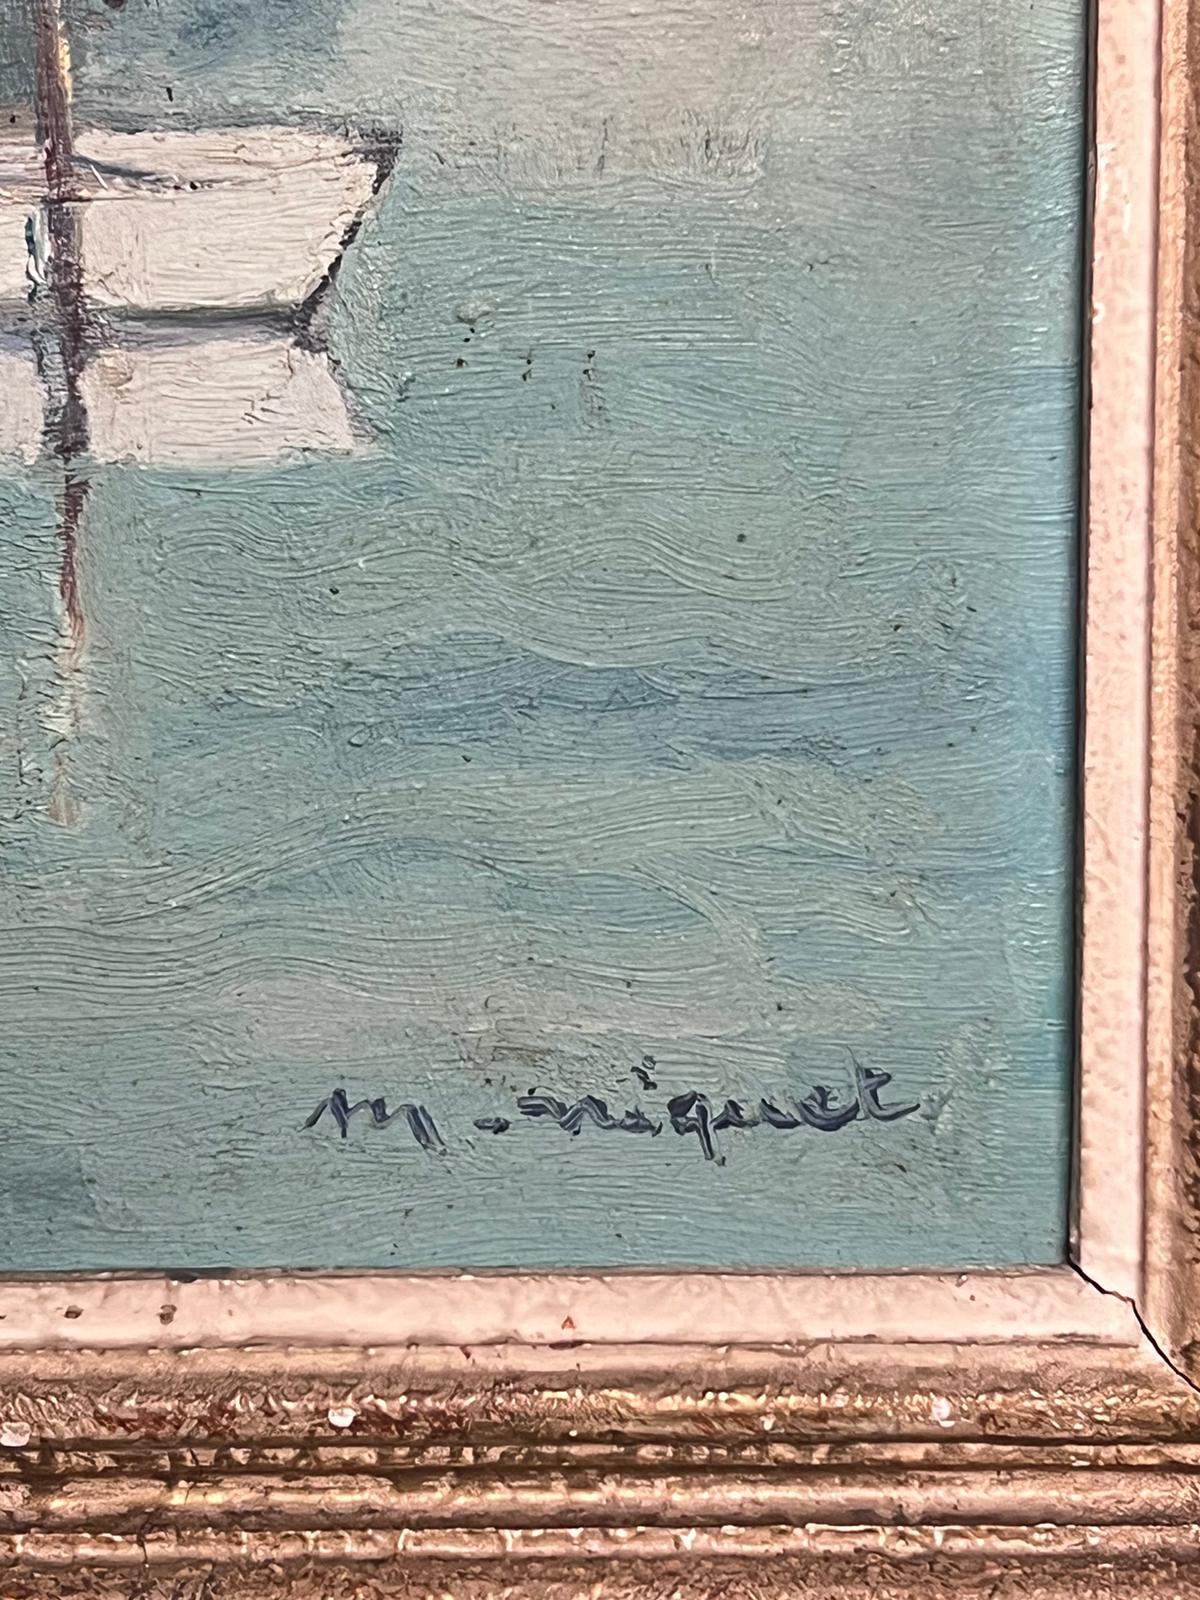 Le Pecheur
by Marcel Niquet (French 1889-1960)
signed oil on board, framed
framed: 12.5 x 16 inches
board: 9.5 x 13 inches
provenance: private collection, UK
condition: very good and sound condition 